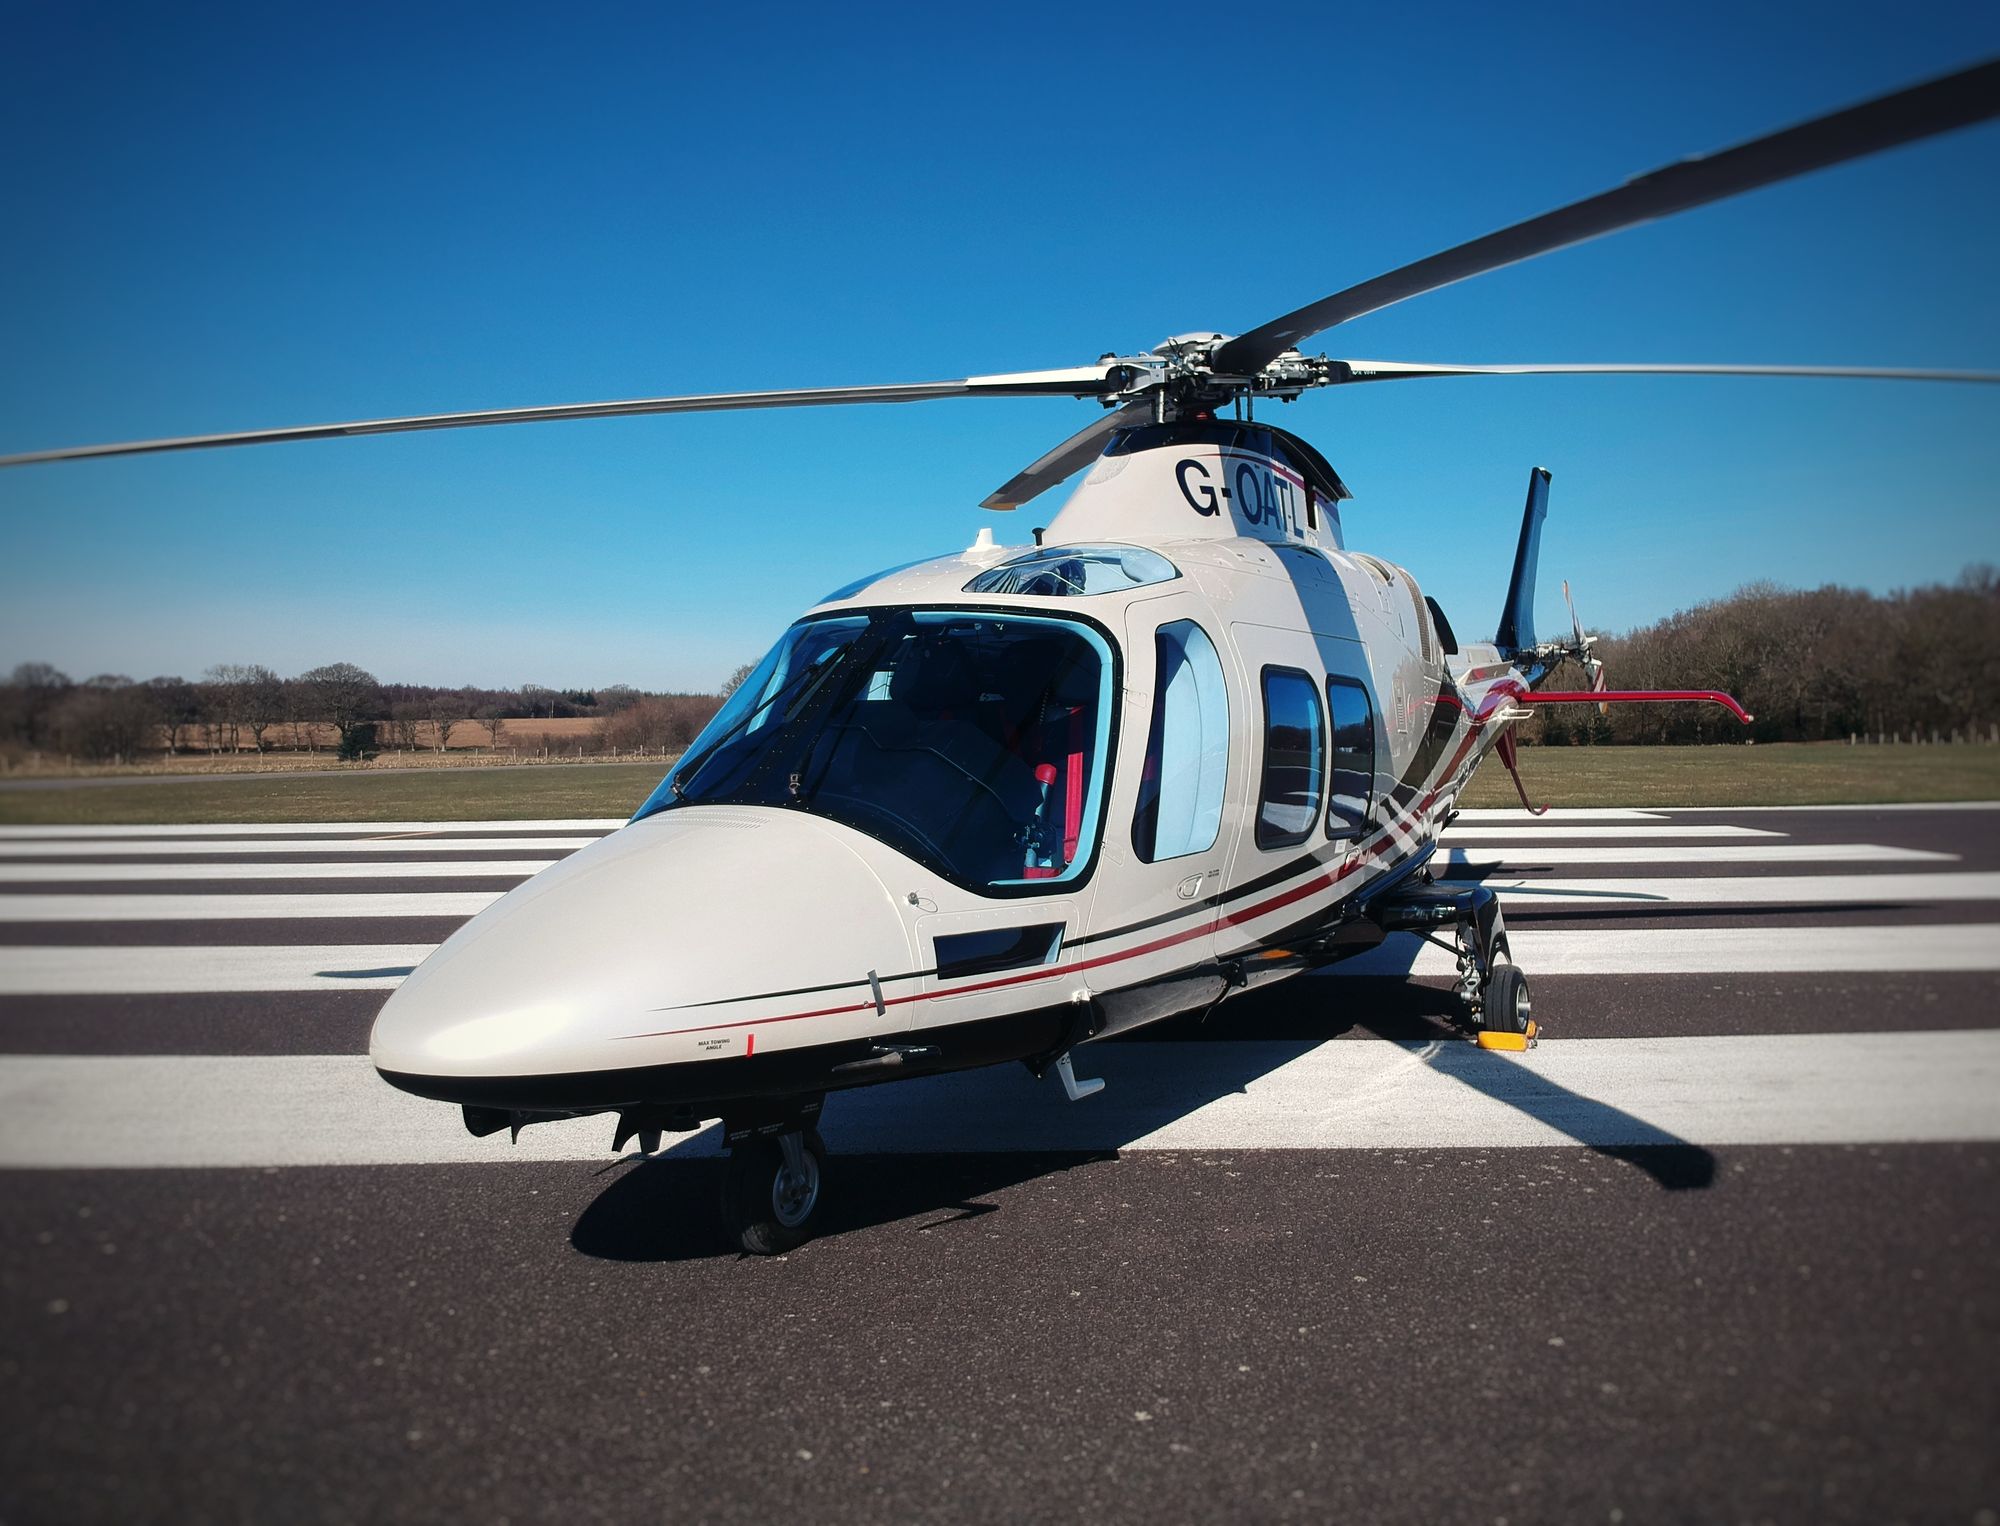 Private, Luxurious & Fast: Business Travel Using Helicopter Charter